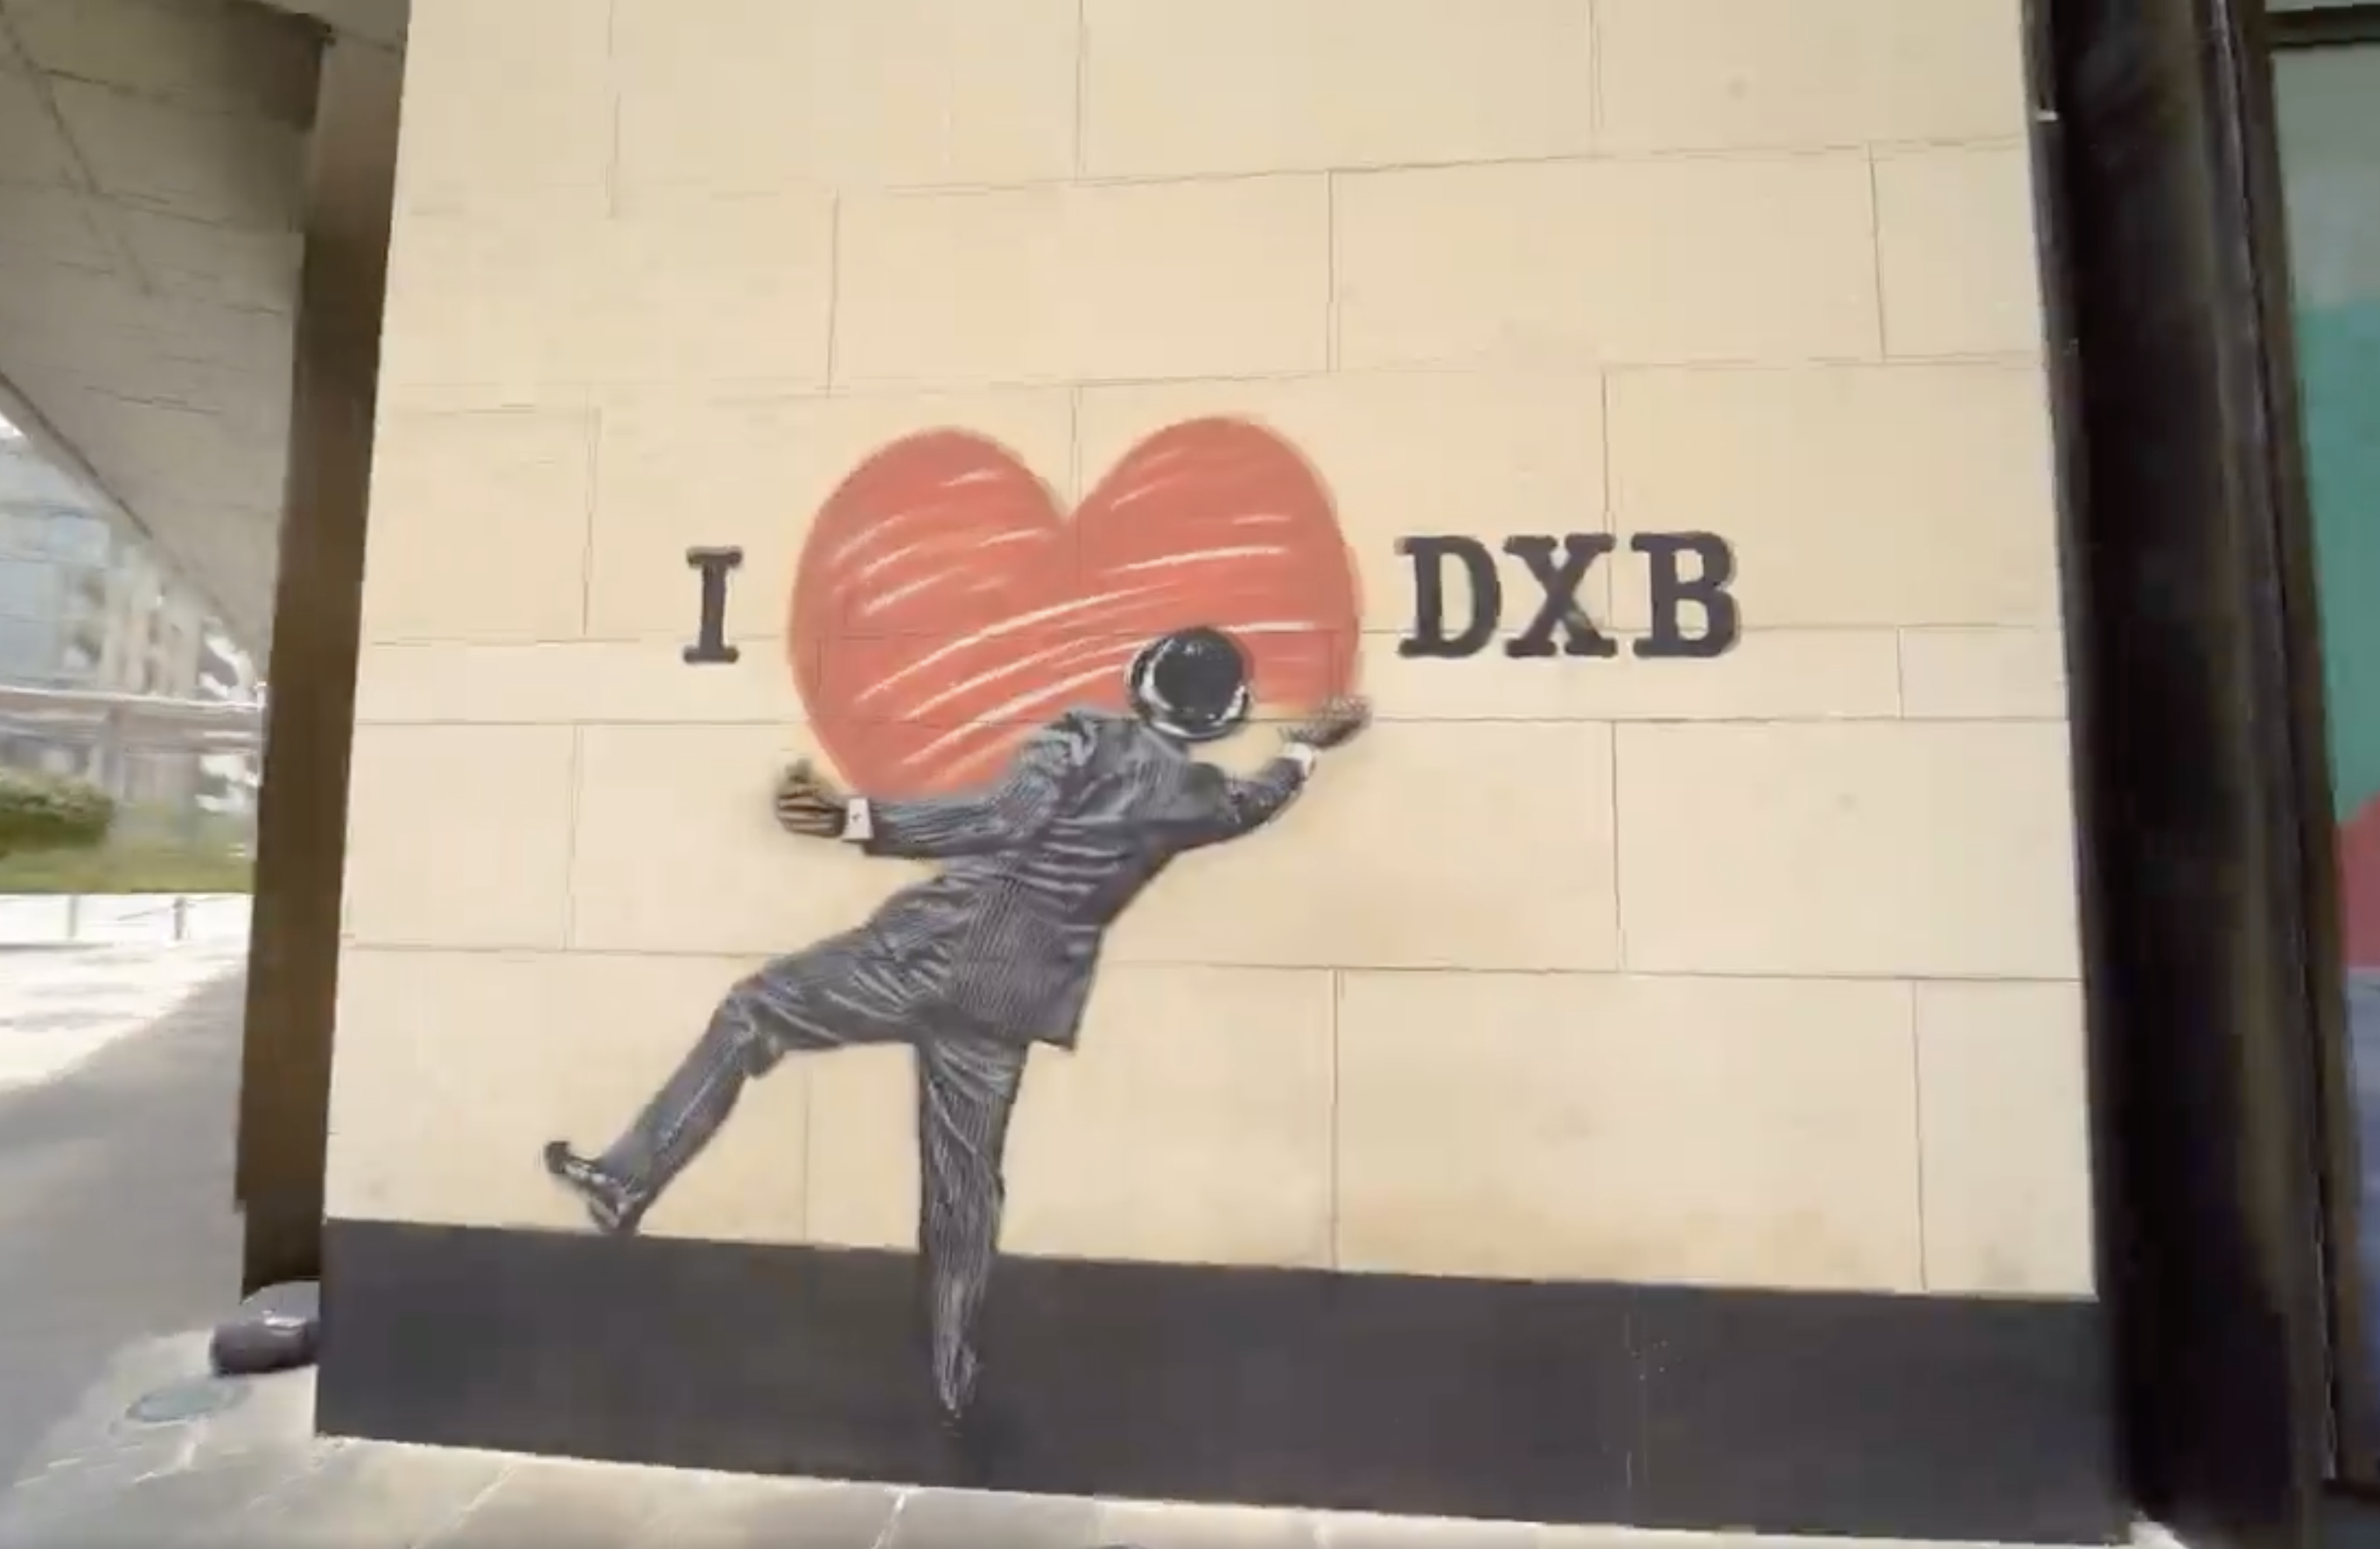 A drawing on a wall that shows a man expressing his love for Dubai